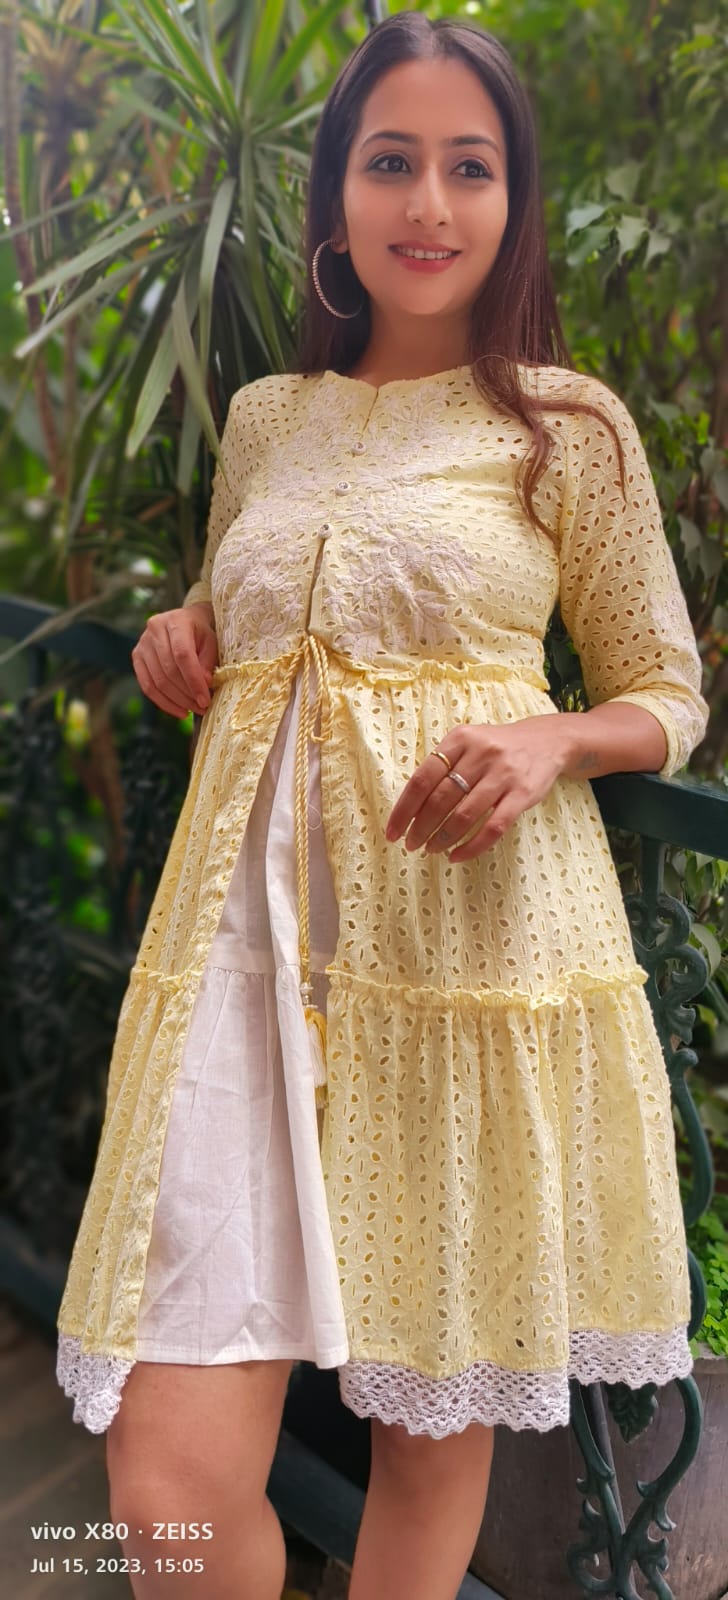 Lemon yellow hacoba cotton knee length frock with inner and crosia lace